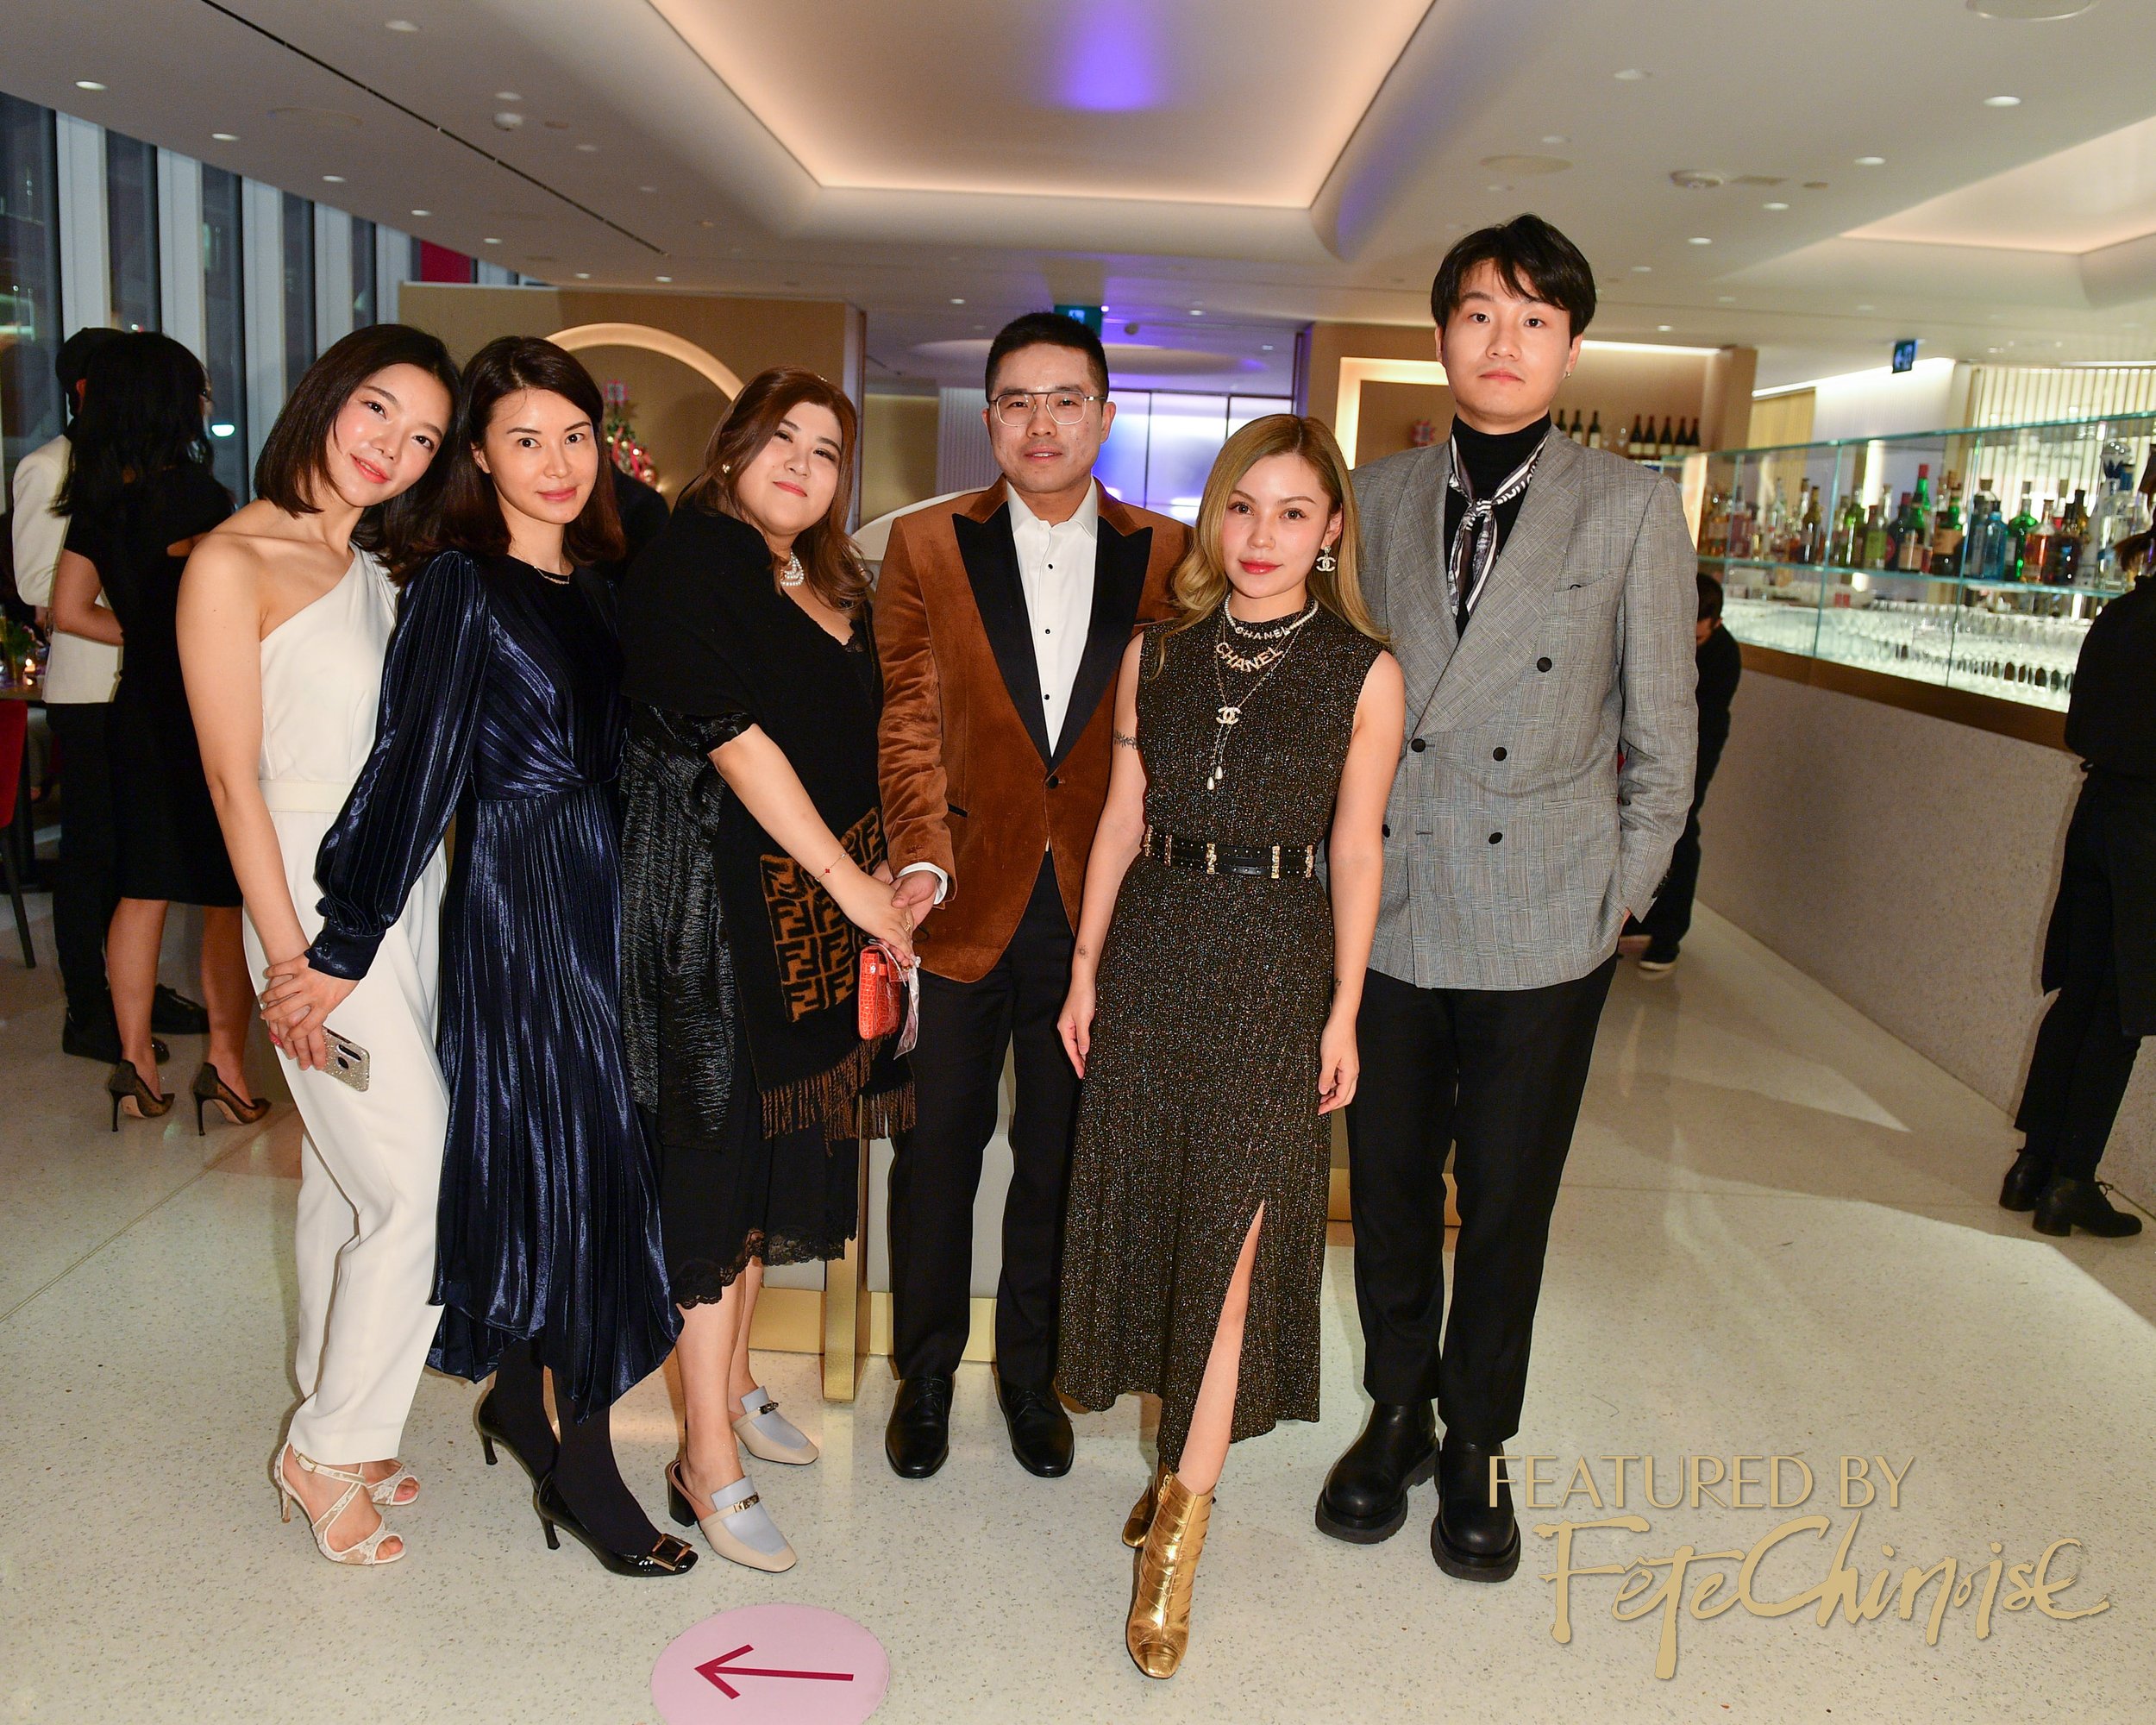 Fete-Chionise-Magaine-edition7-launch-party-holt-renfrew-photography-release-112.jpg